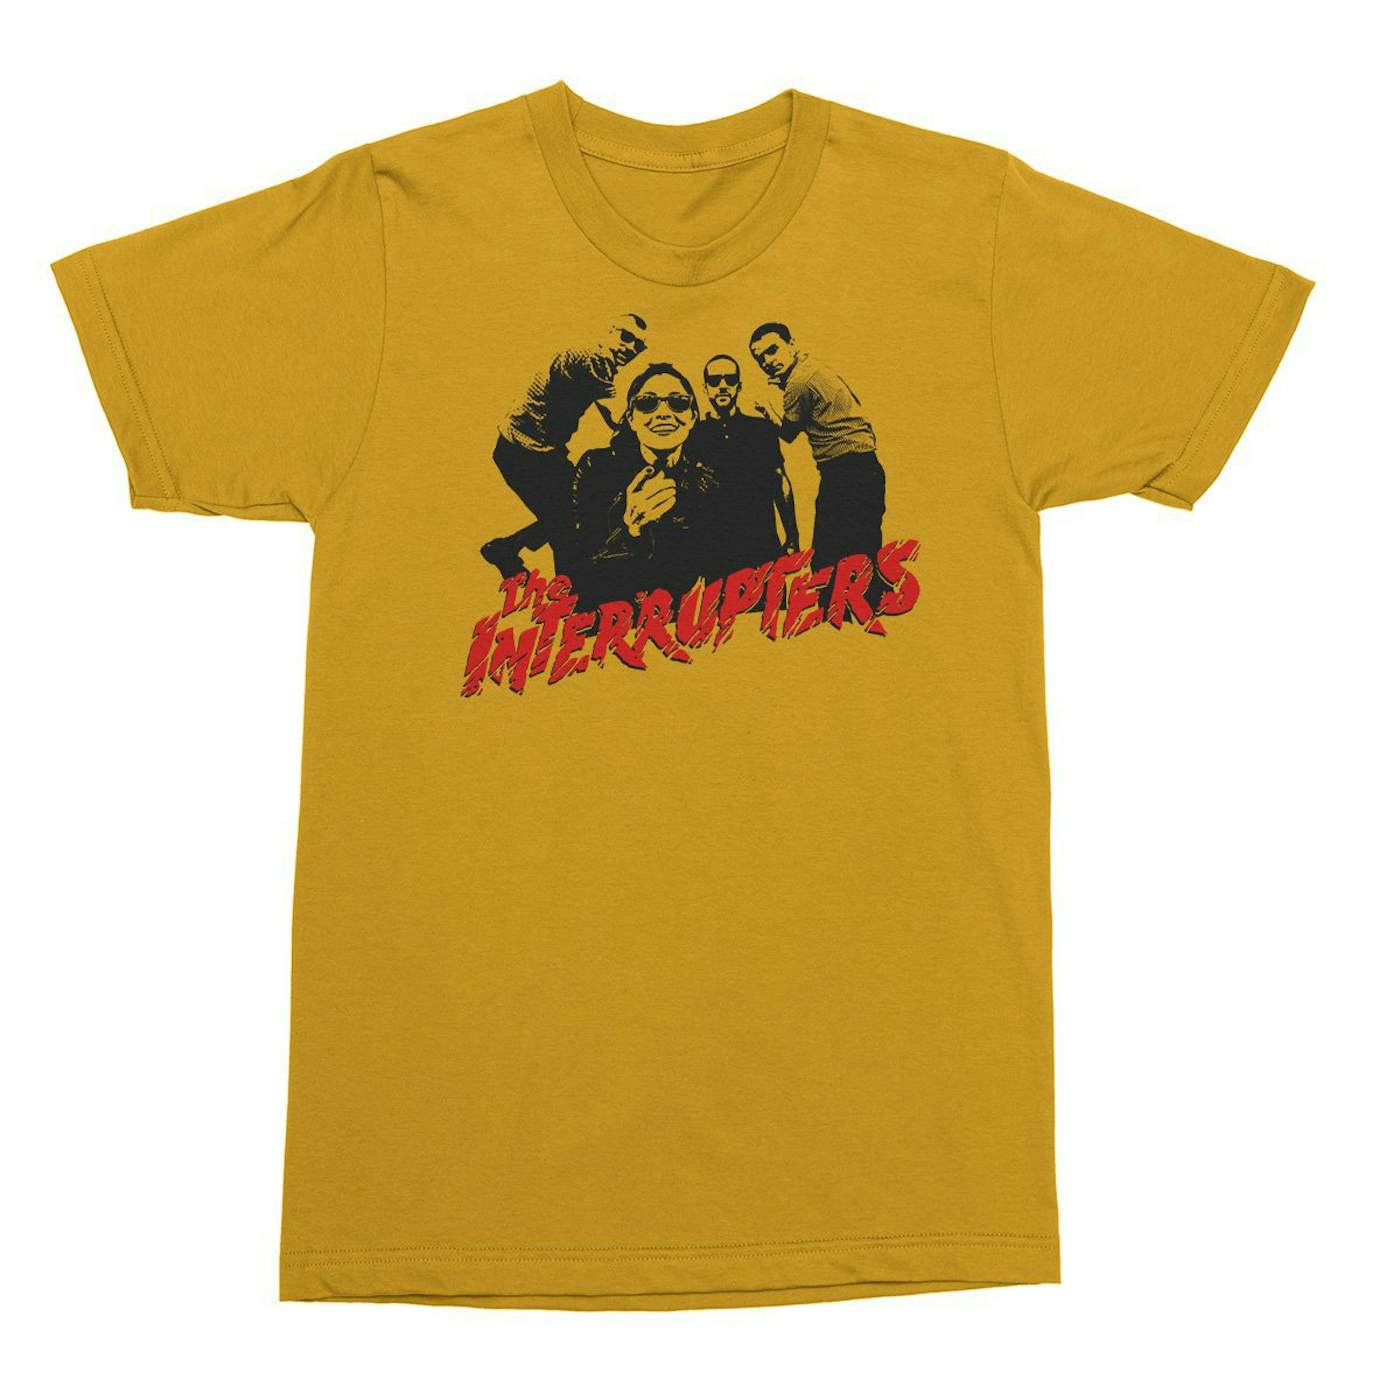 The Interrupters Clash T-Shirt (Yellow)